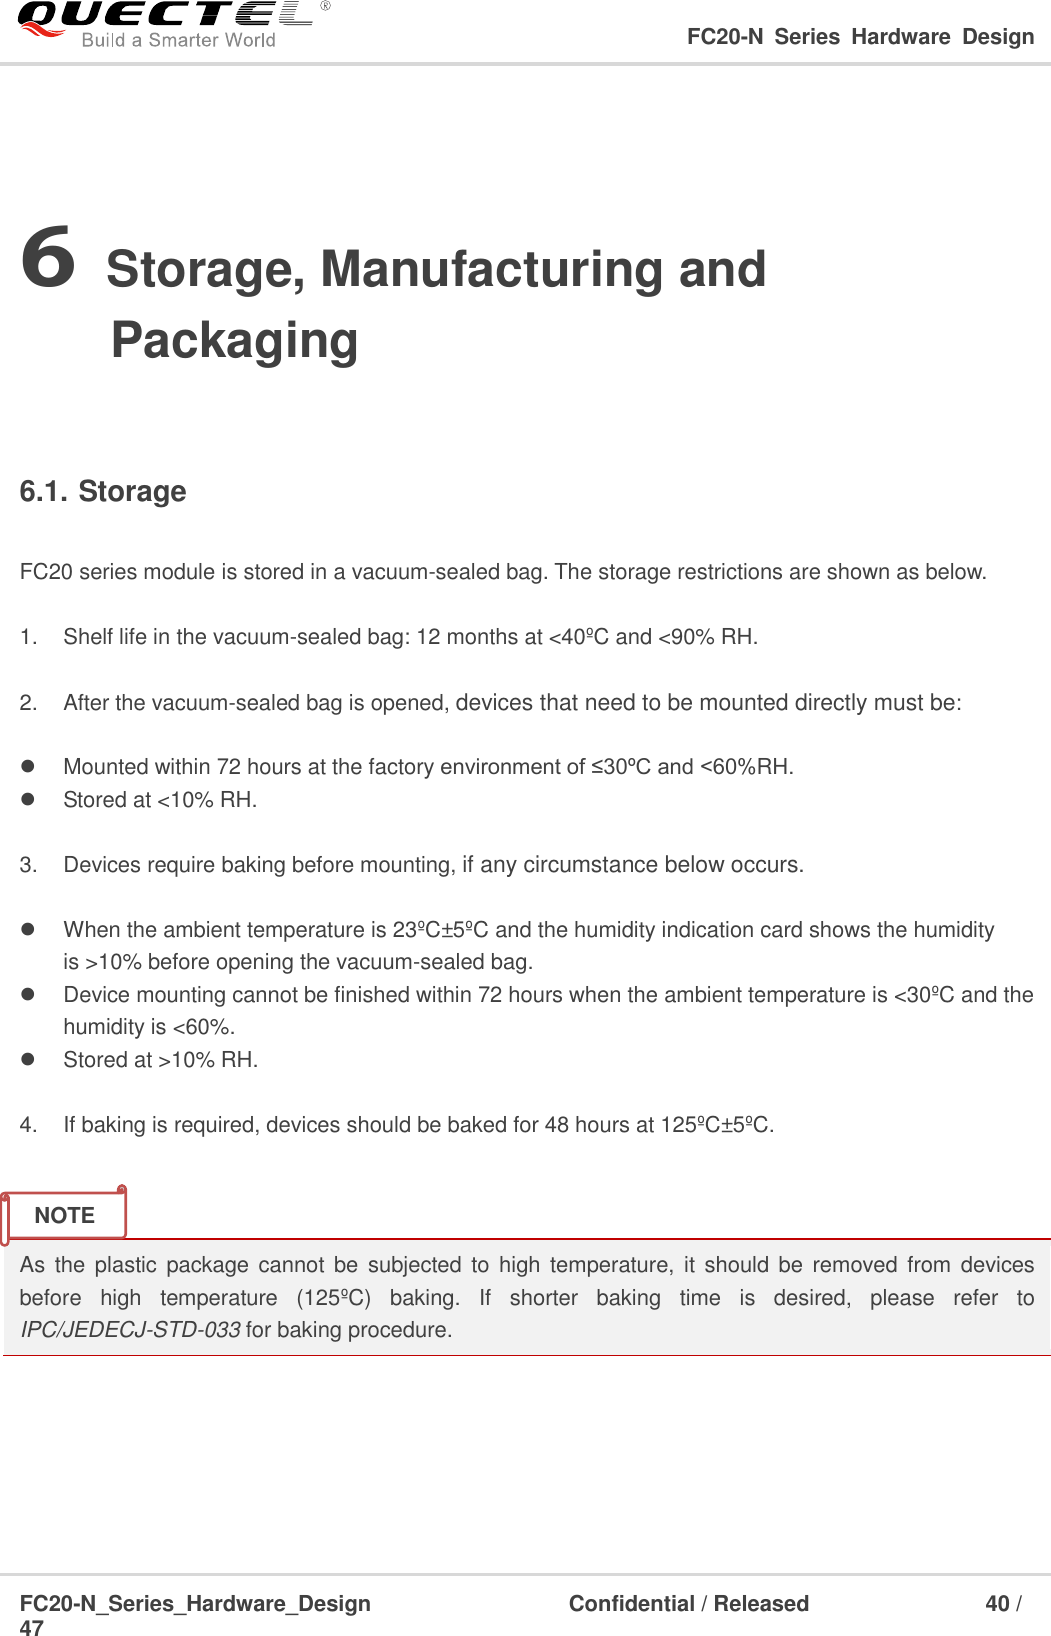                                                                                                                                     FC20-N  Series  Hardware  Design  FC20-N_Series_Hardware_Design                                Confidential / Released                    40 / 47    6 Storage, Manufacturing and Packaging  6.1. Storage  FC20 series module is stored in a vacuum-sealed bag. The storage restrictions are shown as below.    1.  Shelf life in the vacuum-sealed bag: 12 months at &lt;40ºC and &lt;90% RH.    2.  After the vacuum-sealed bag is opened, devices that need to be mounted directly must be:    Mounted within 72 hours at the factory environment of ≤30ºC and &lt;60%RH.   Stored at &lt;10% RH.  3.  Devices require baking before mounting, if any circumstance below occurs.    When the ambient temperature is 23ºC±5ºC and the humidity indication card shows the humidity is &gt;10% before opening the vacuum-sealed bag.    Device mounting cannot be finished within 72 hours when the ambient temperature is &lt;30ºC and the humidity is &lt;60%.   Stored at &gt;10% RH.  4.  If baking is required, devices should be baked for 48 hours at 125ºC±5ºC.   As the  plastic package  cannot  be  subjected to  high  temperature, it  should be  removed from devices before  high  temperature  (125ºC )  baking.  If  shorter  baking  time  is  desired,  please  refer  to IPC/JEDECJ-STD-033 for baking procedure.      NOTE 